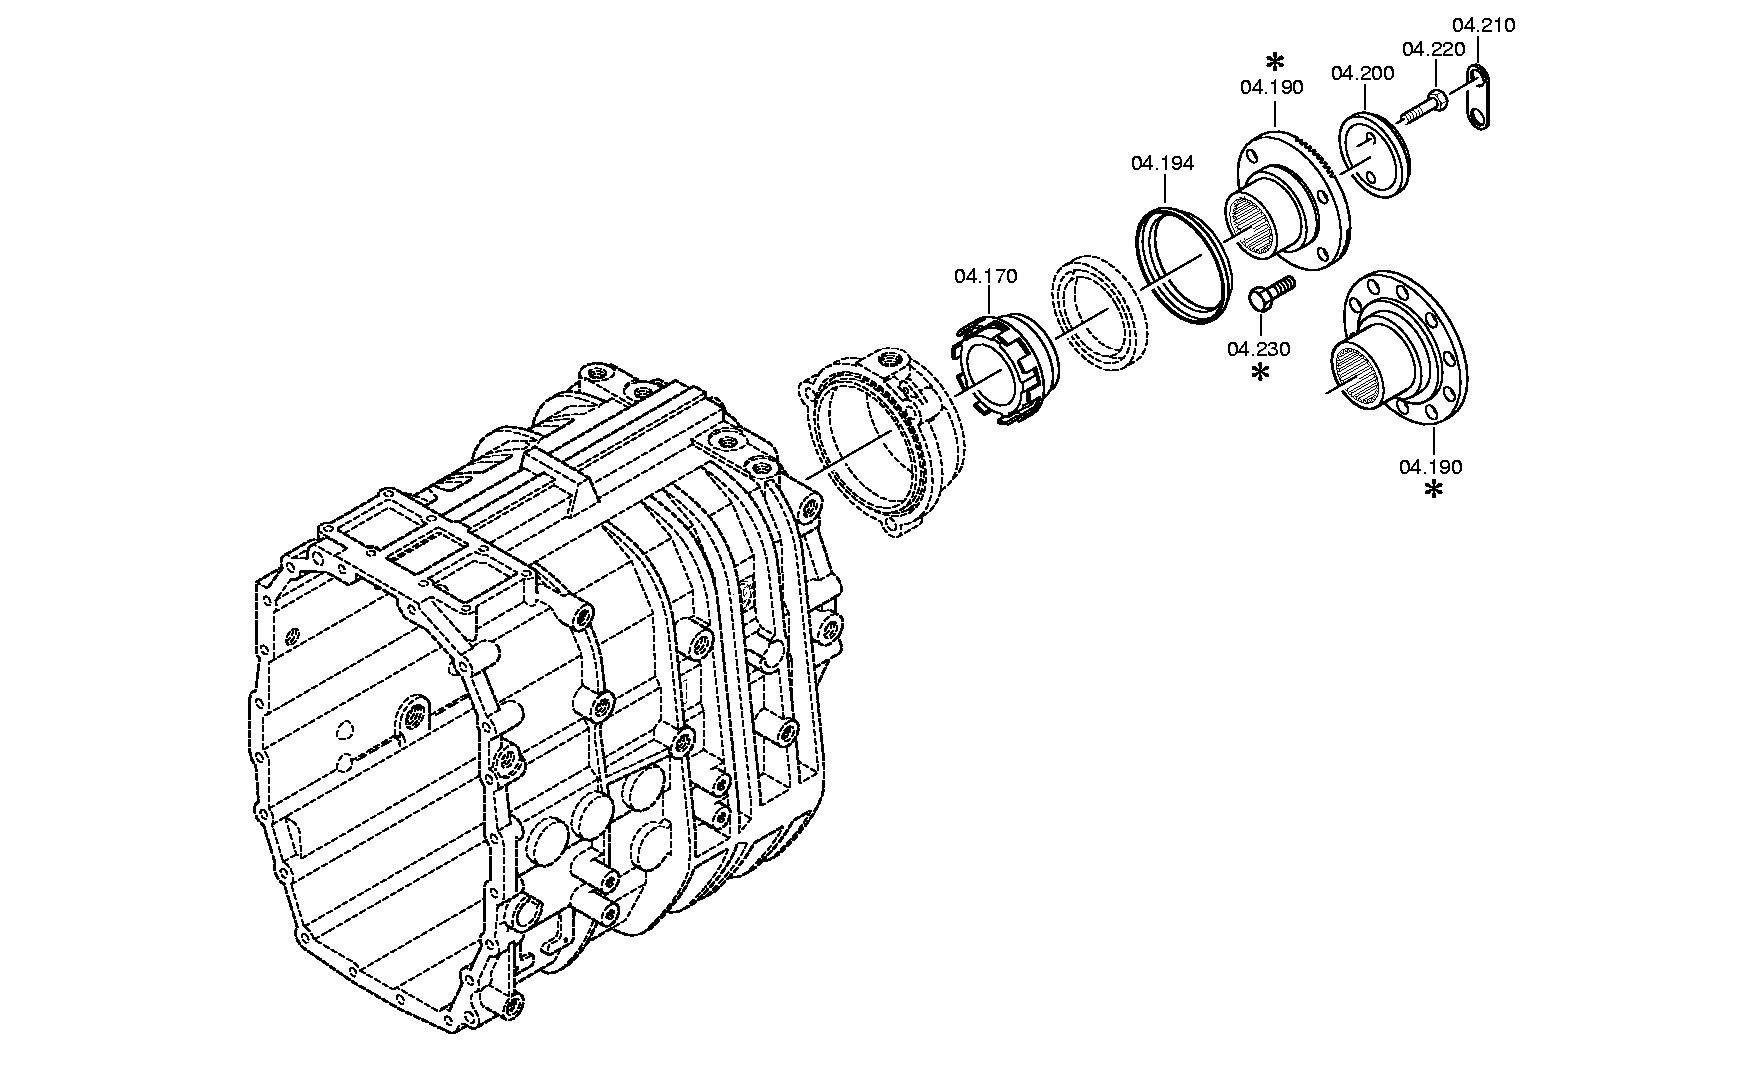 drawing for DAF 69774 - HEXAGON SCREW